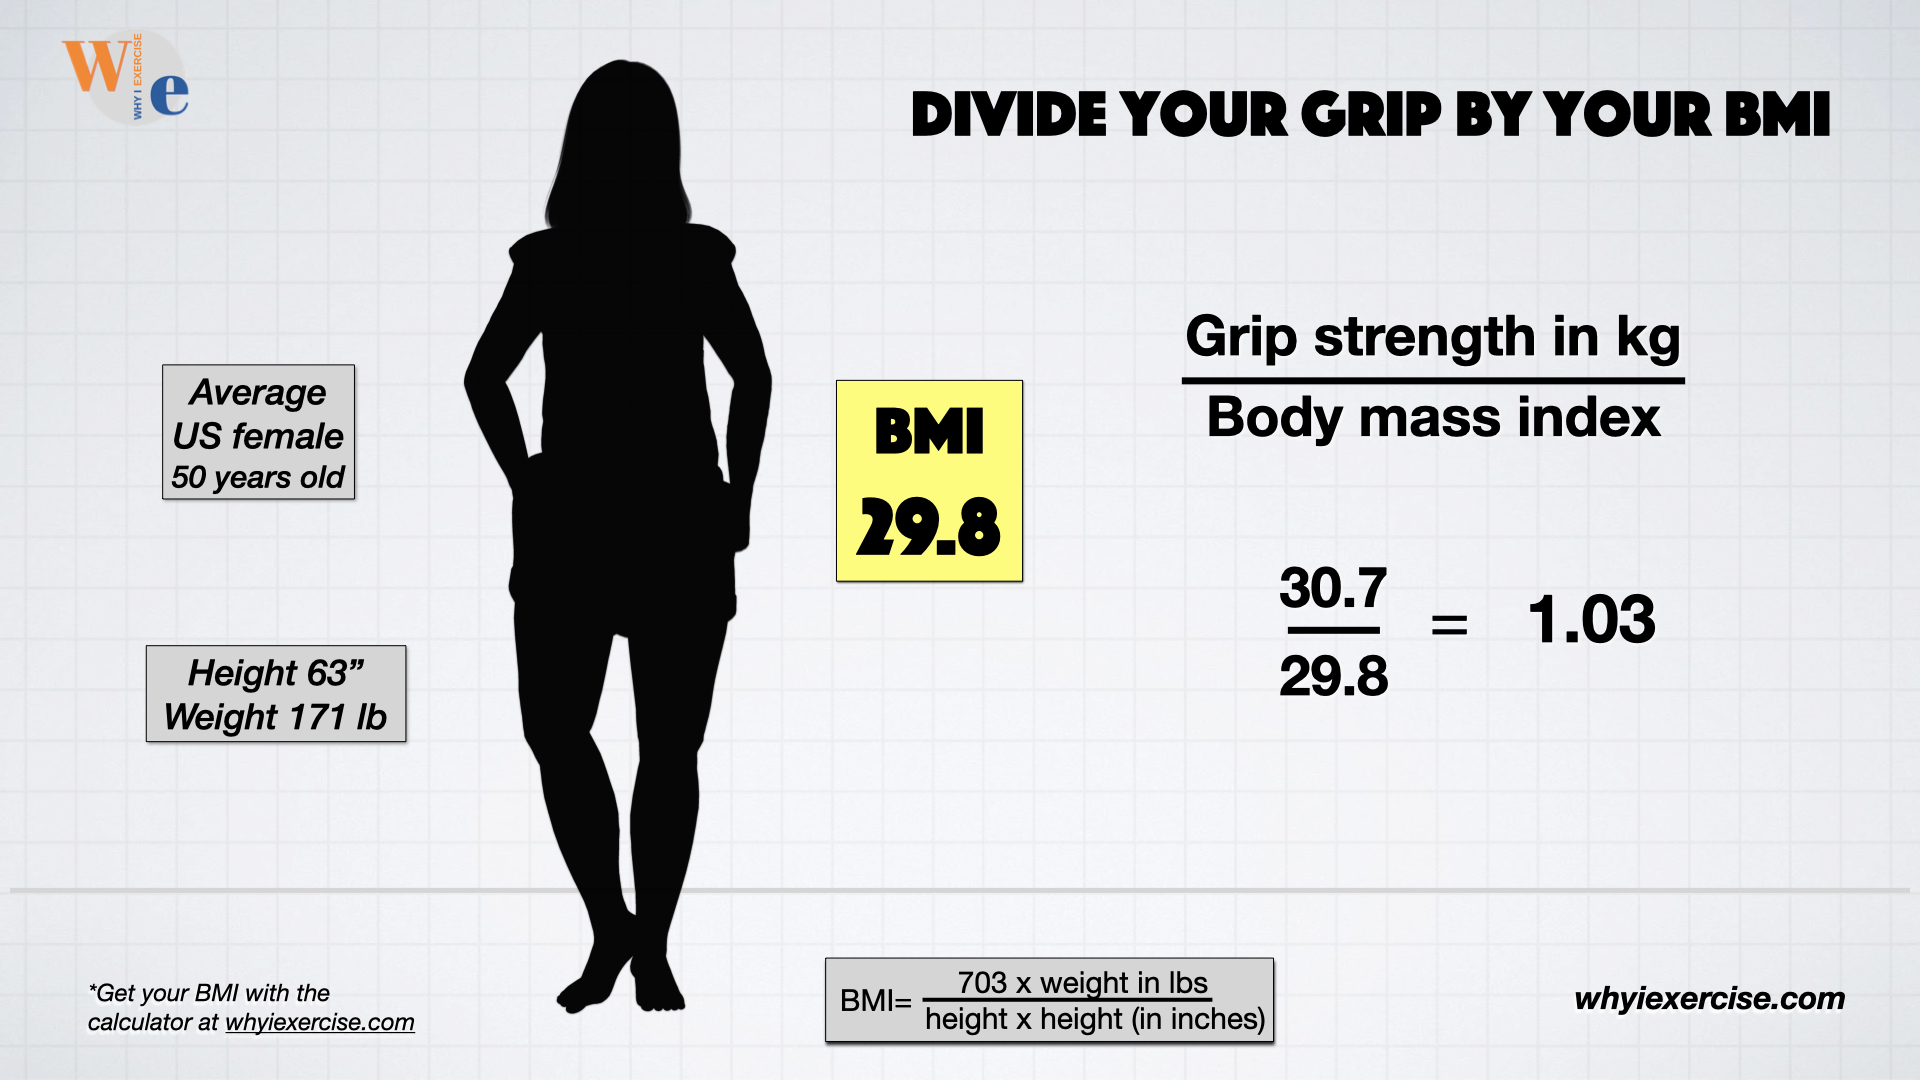 Find your relative grip strength. Divide grip in kg by your BMI